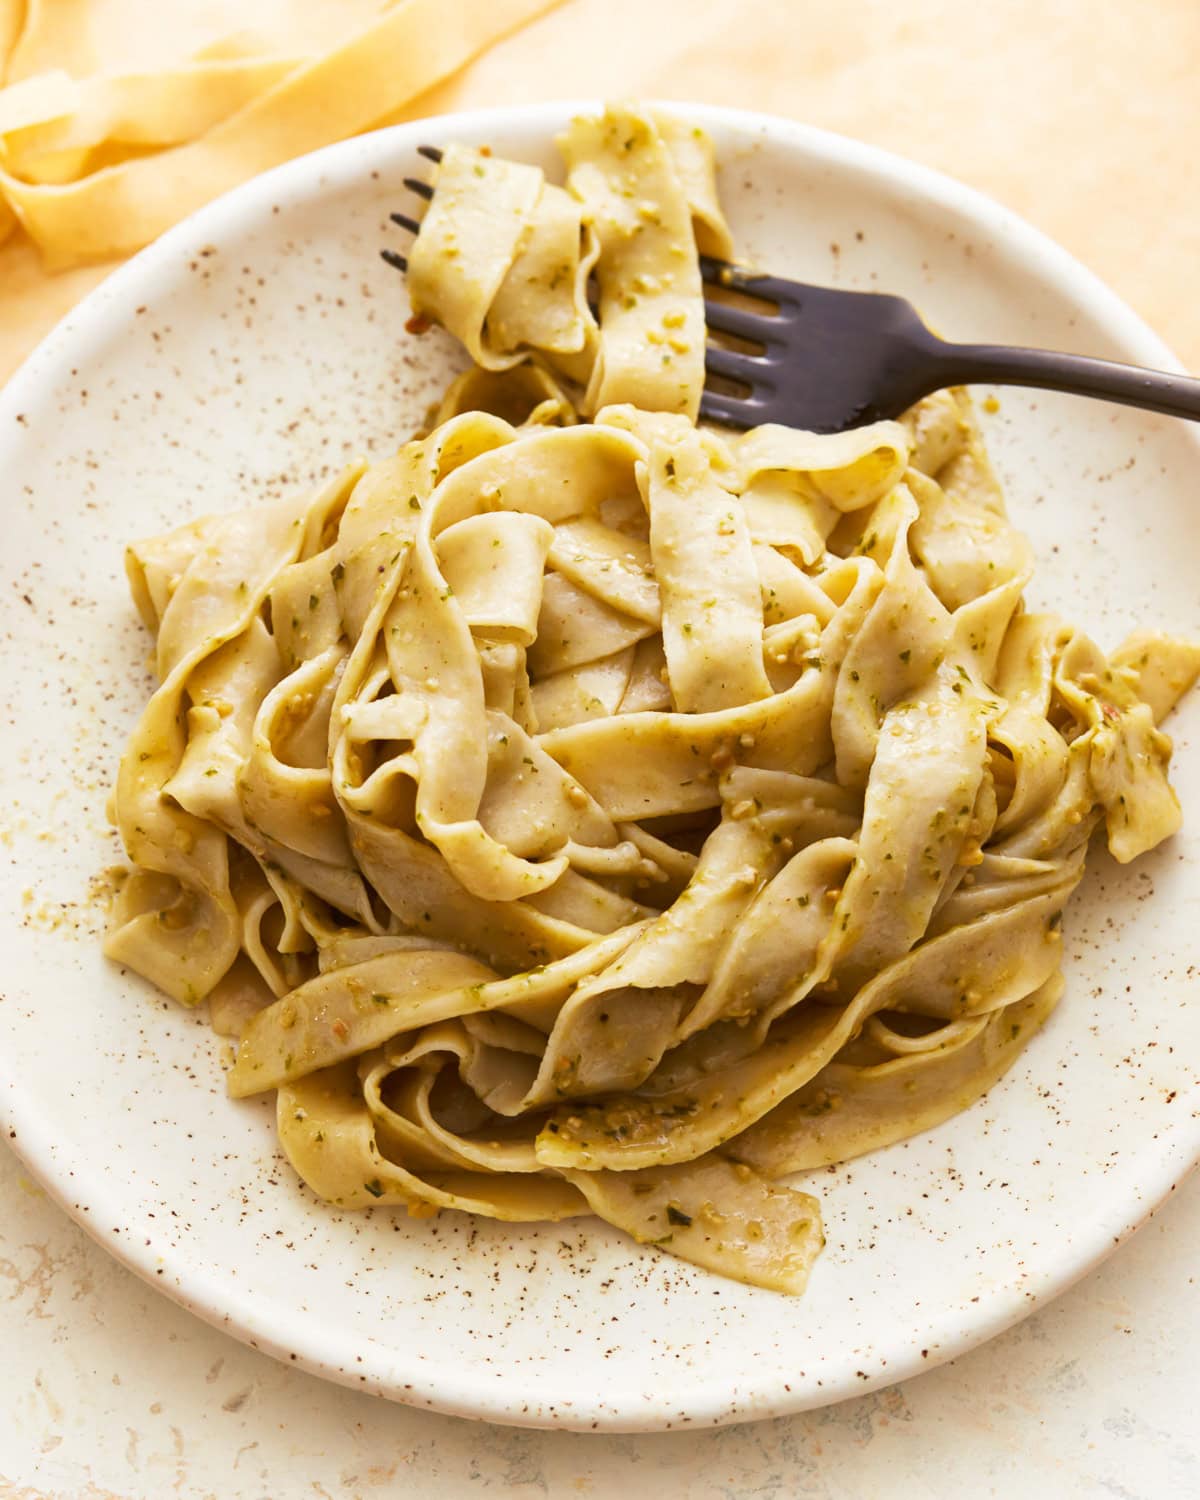 a serving of cooked gluten-free pasta in a bowl with a fork.